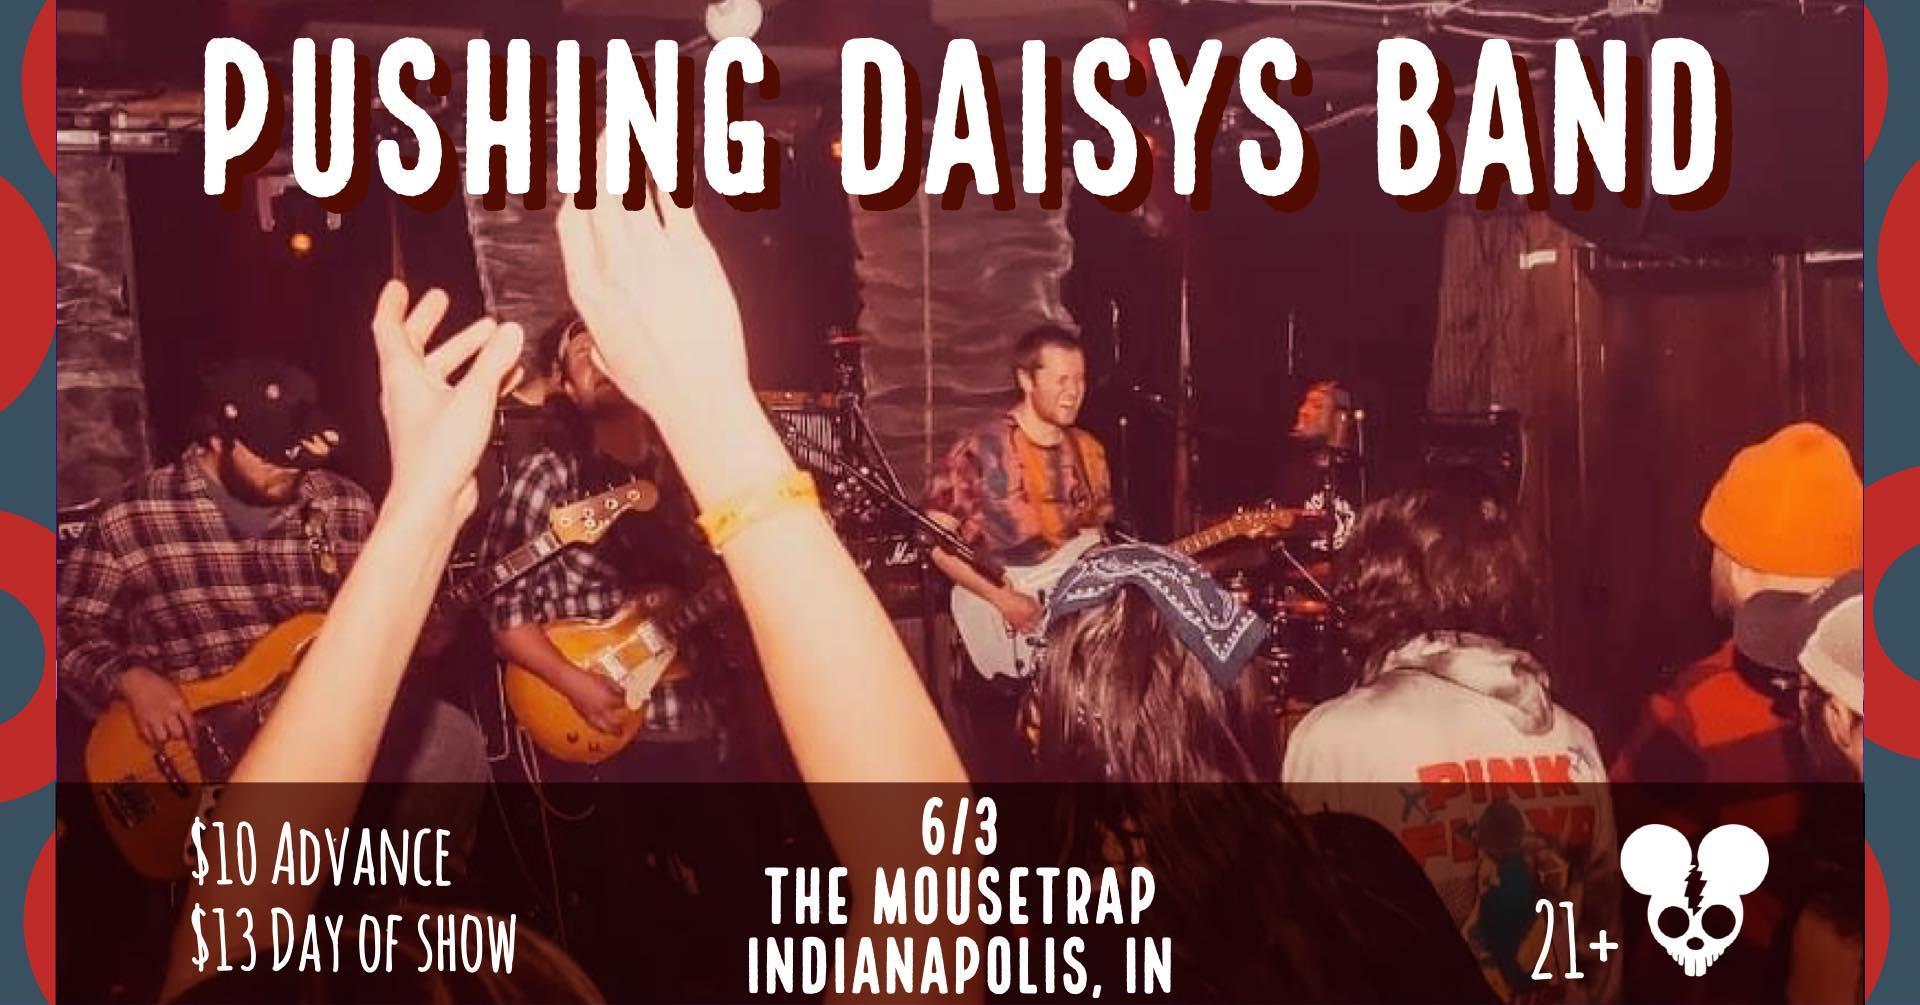 Pushing Daisy’s Band at The Mousetrap – Phish After Party